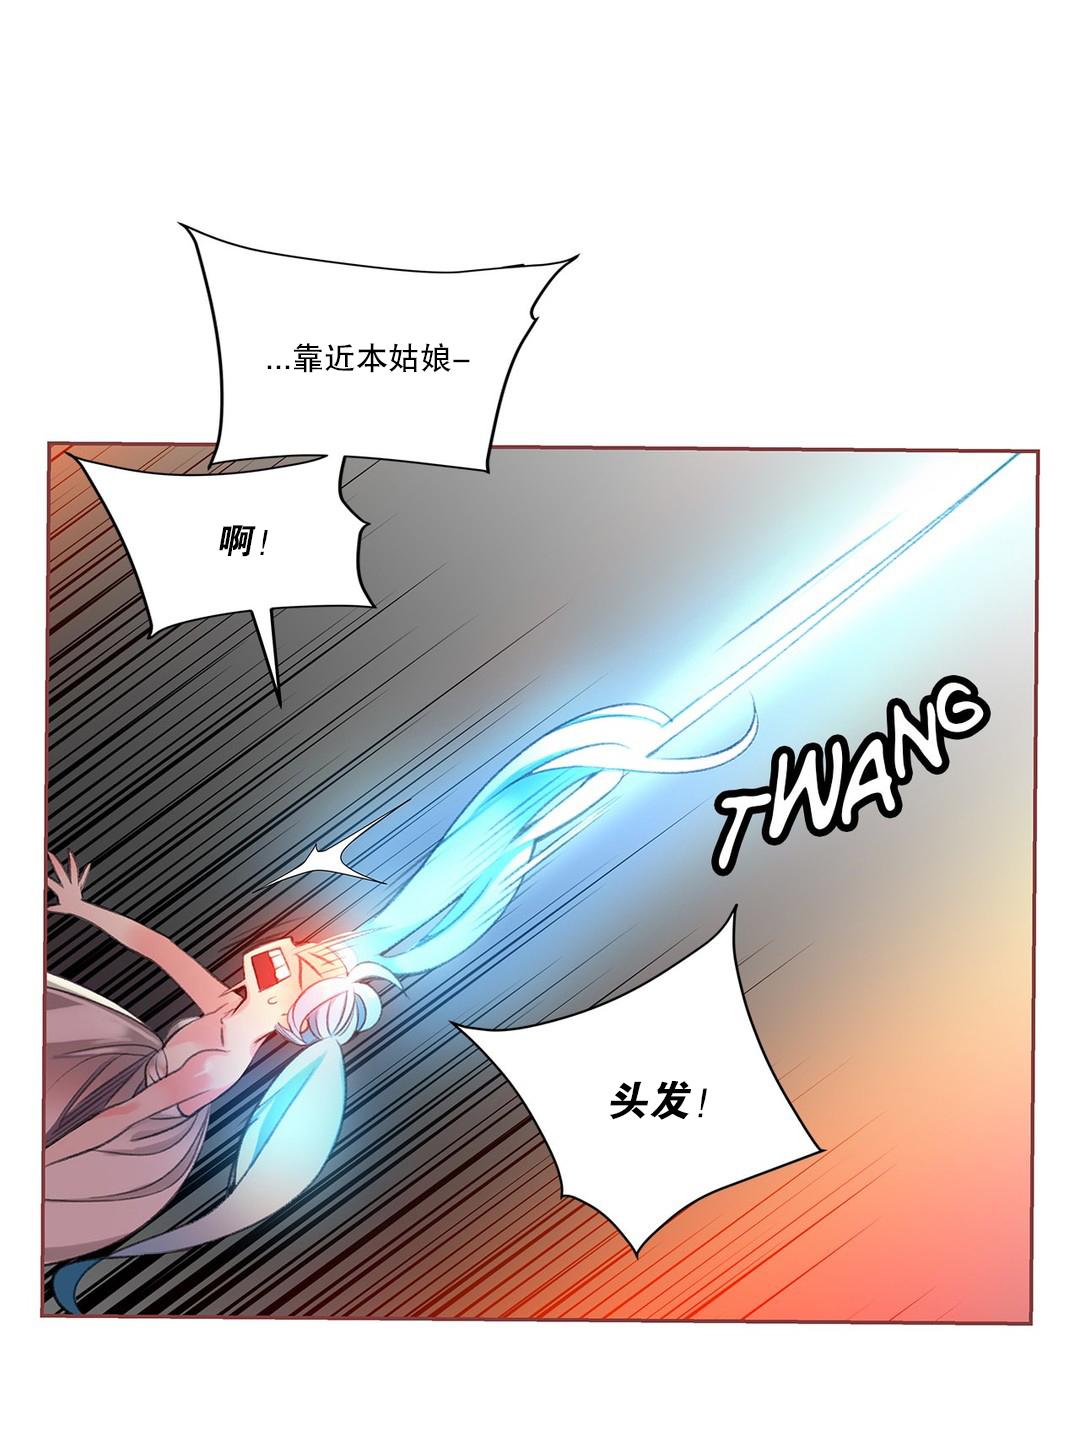 [Juder] Lilith`s Cord (第二季) Ch.61-68 [Chinese] [aaatwist个人汉化] [Ongoing] 9